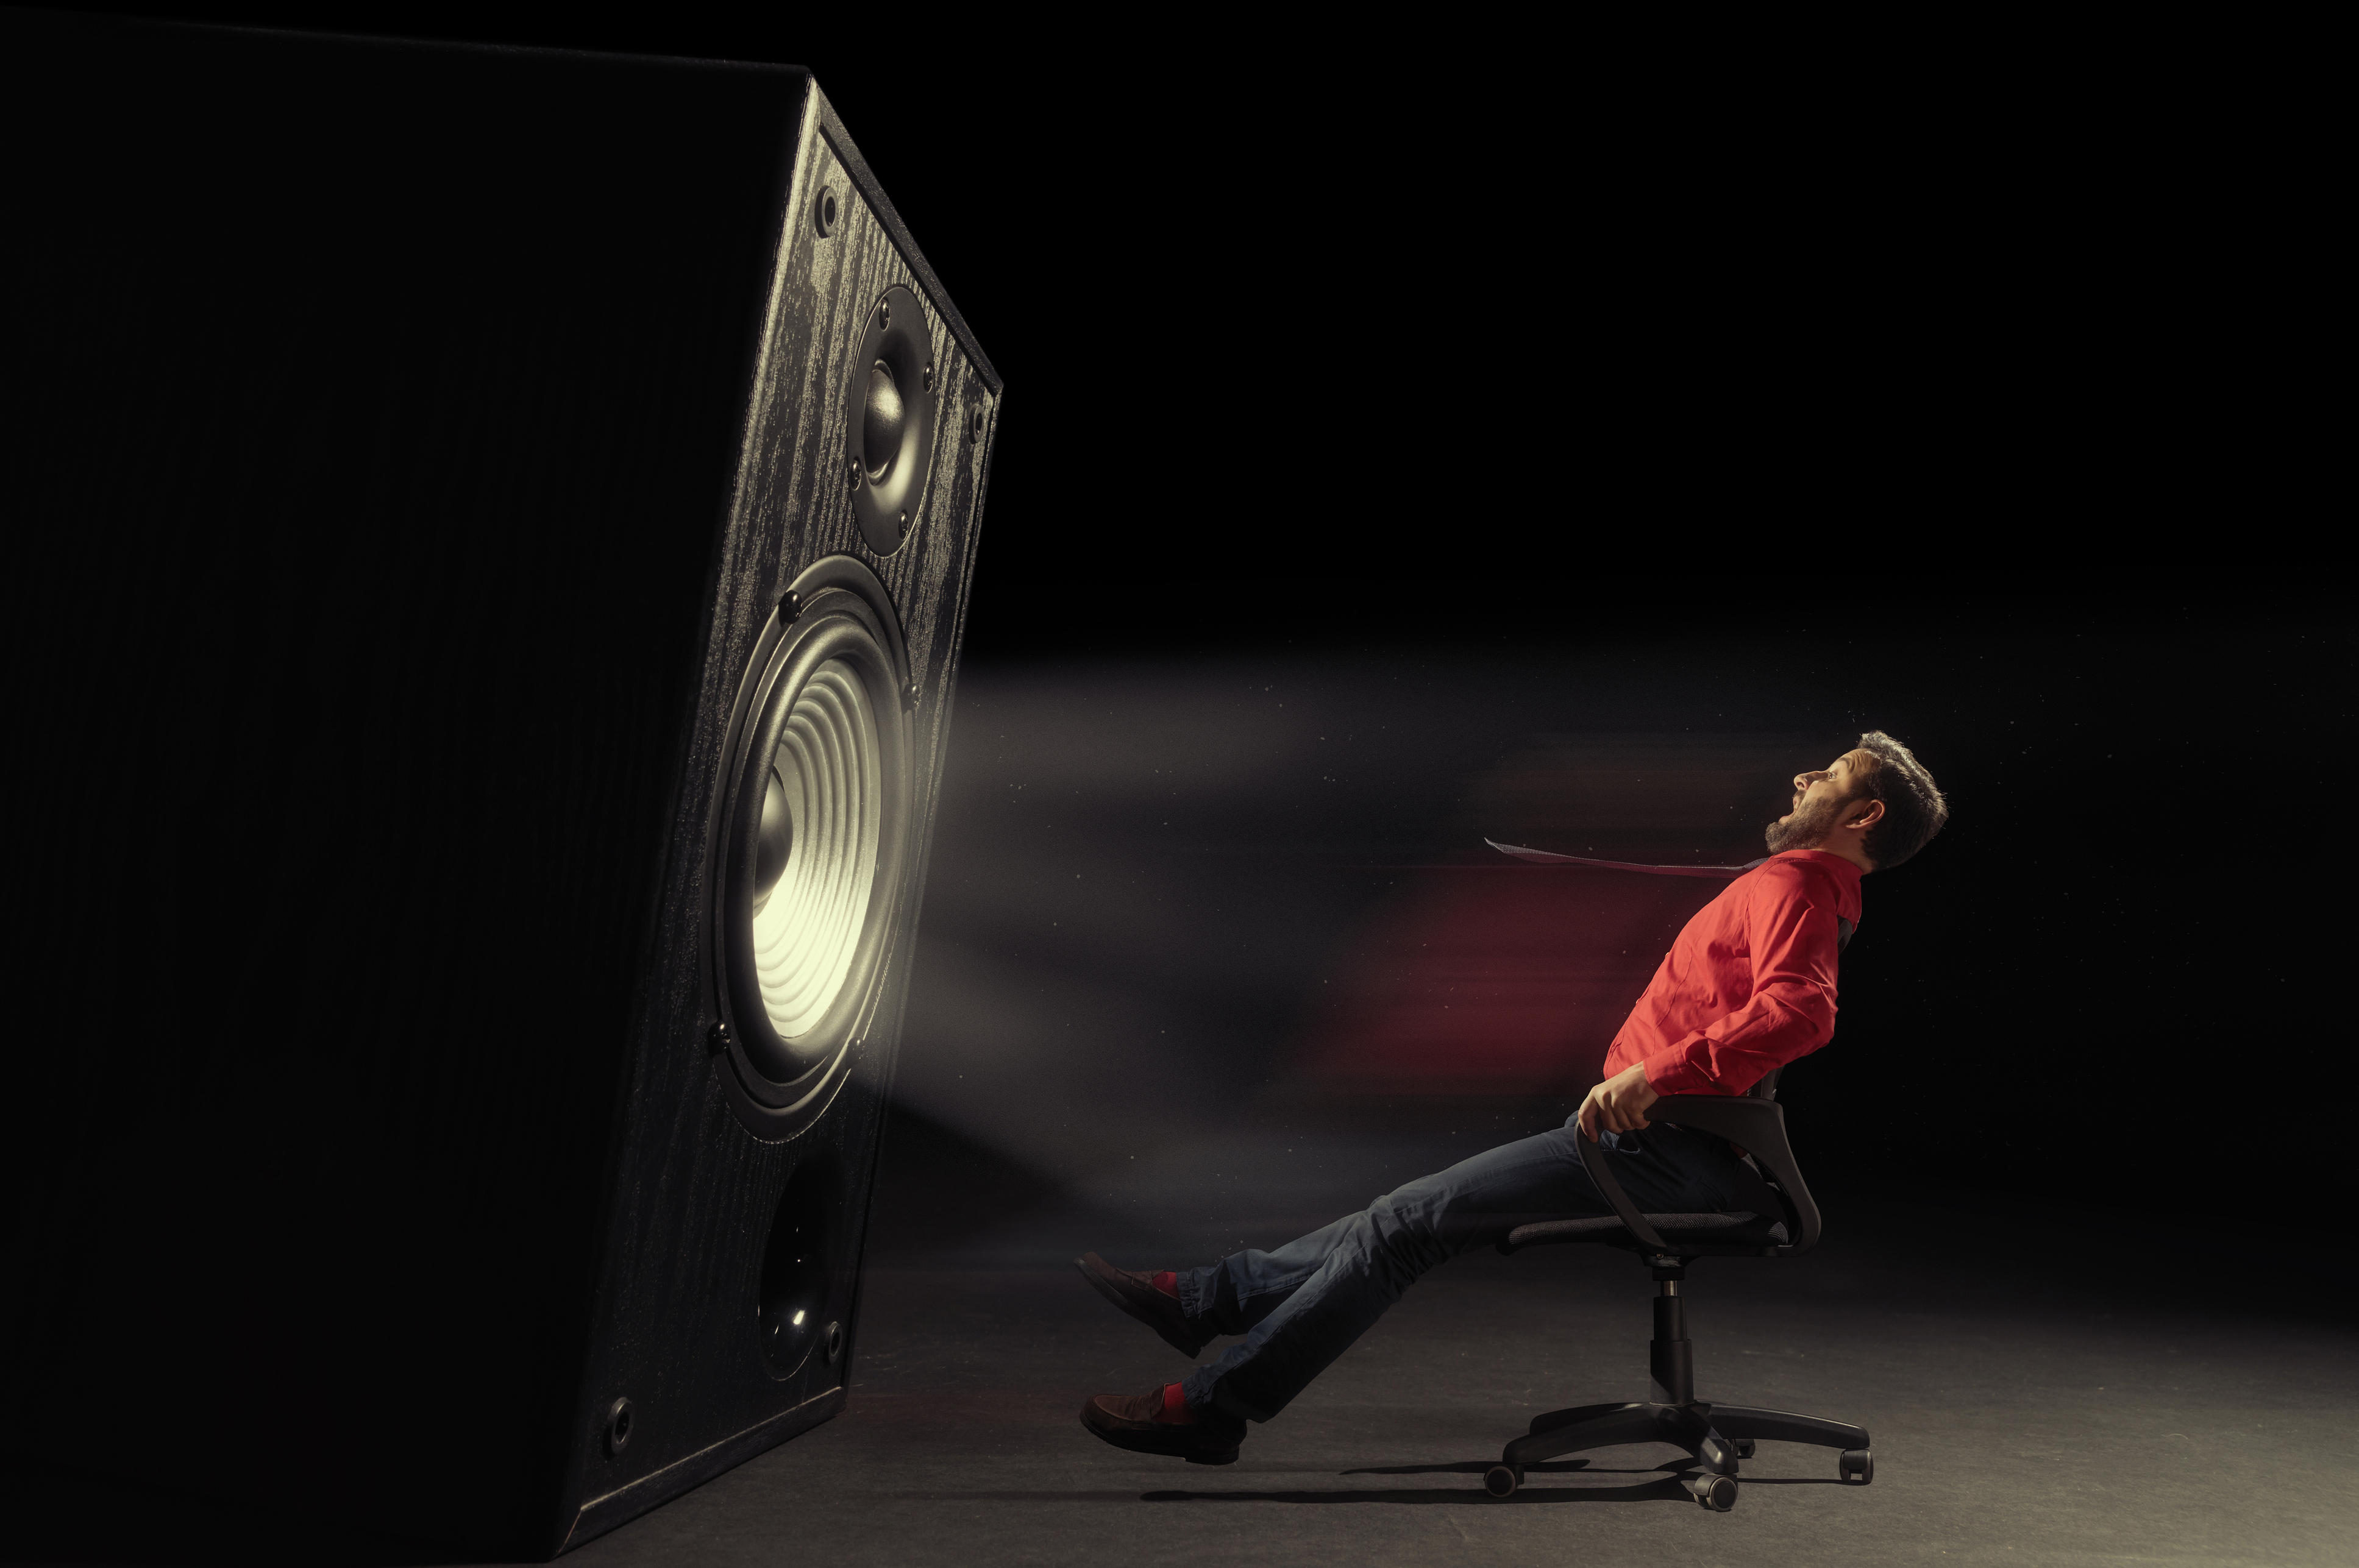 Man in red shirt seated in chair being blasted back by giant subwoofer speaker